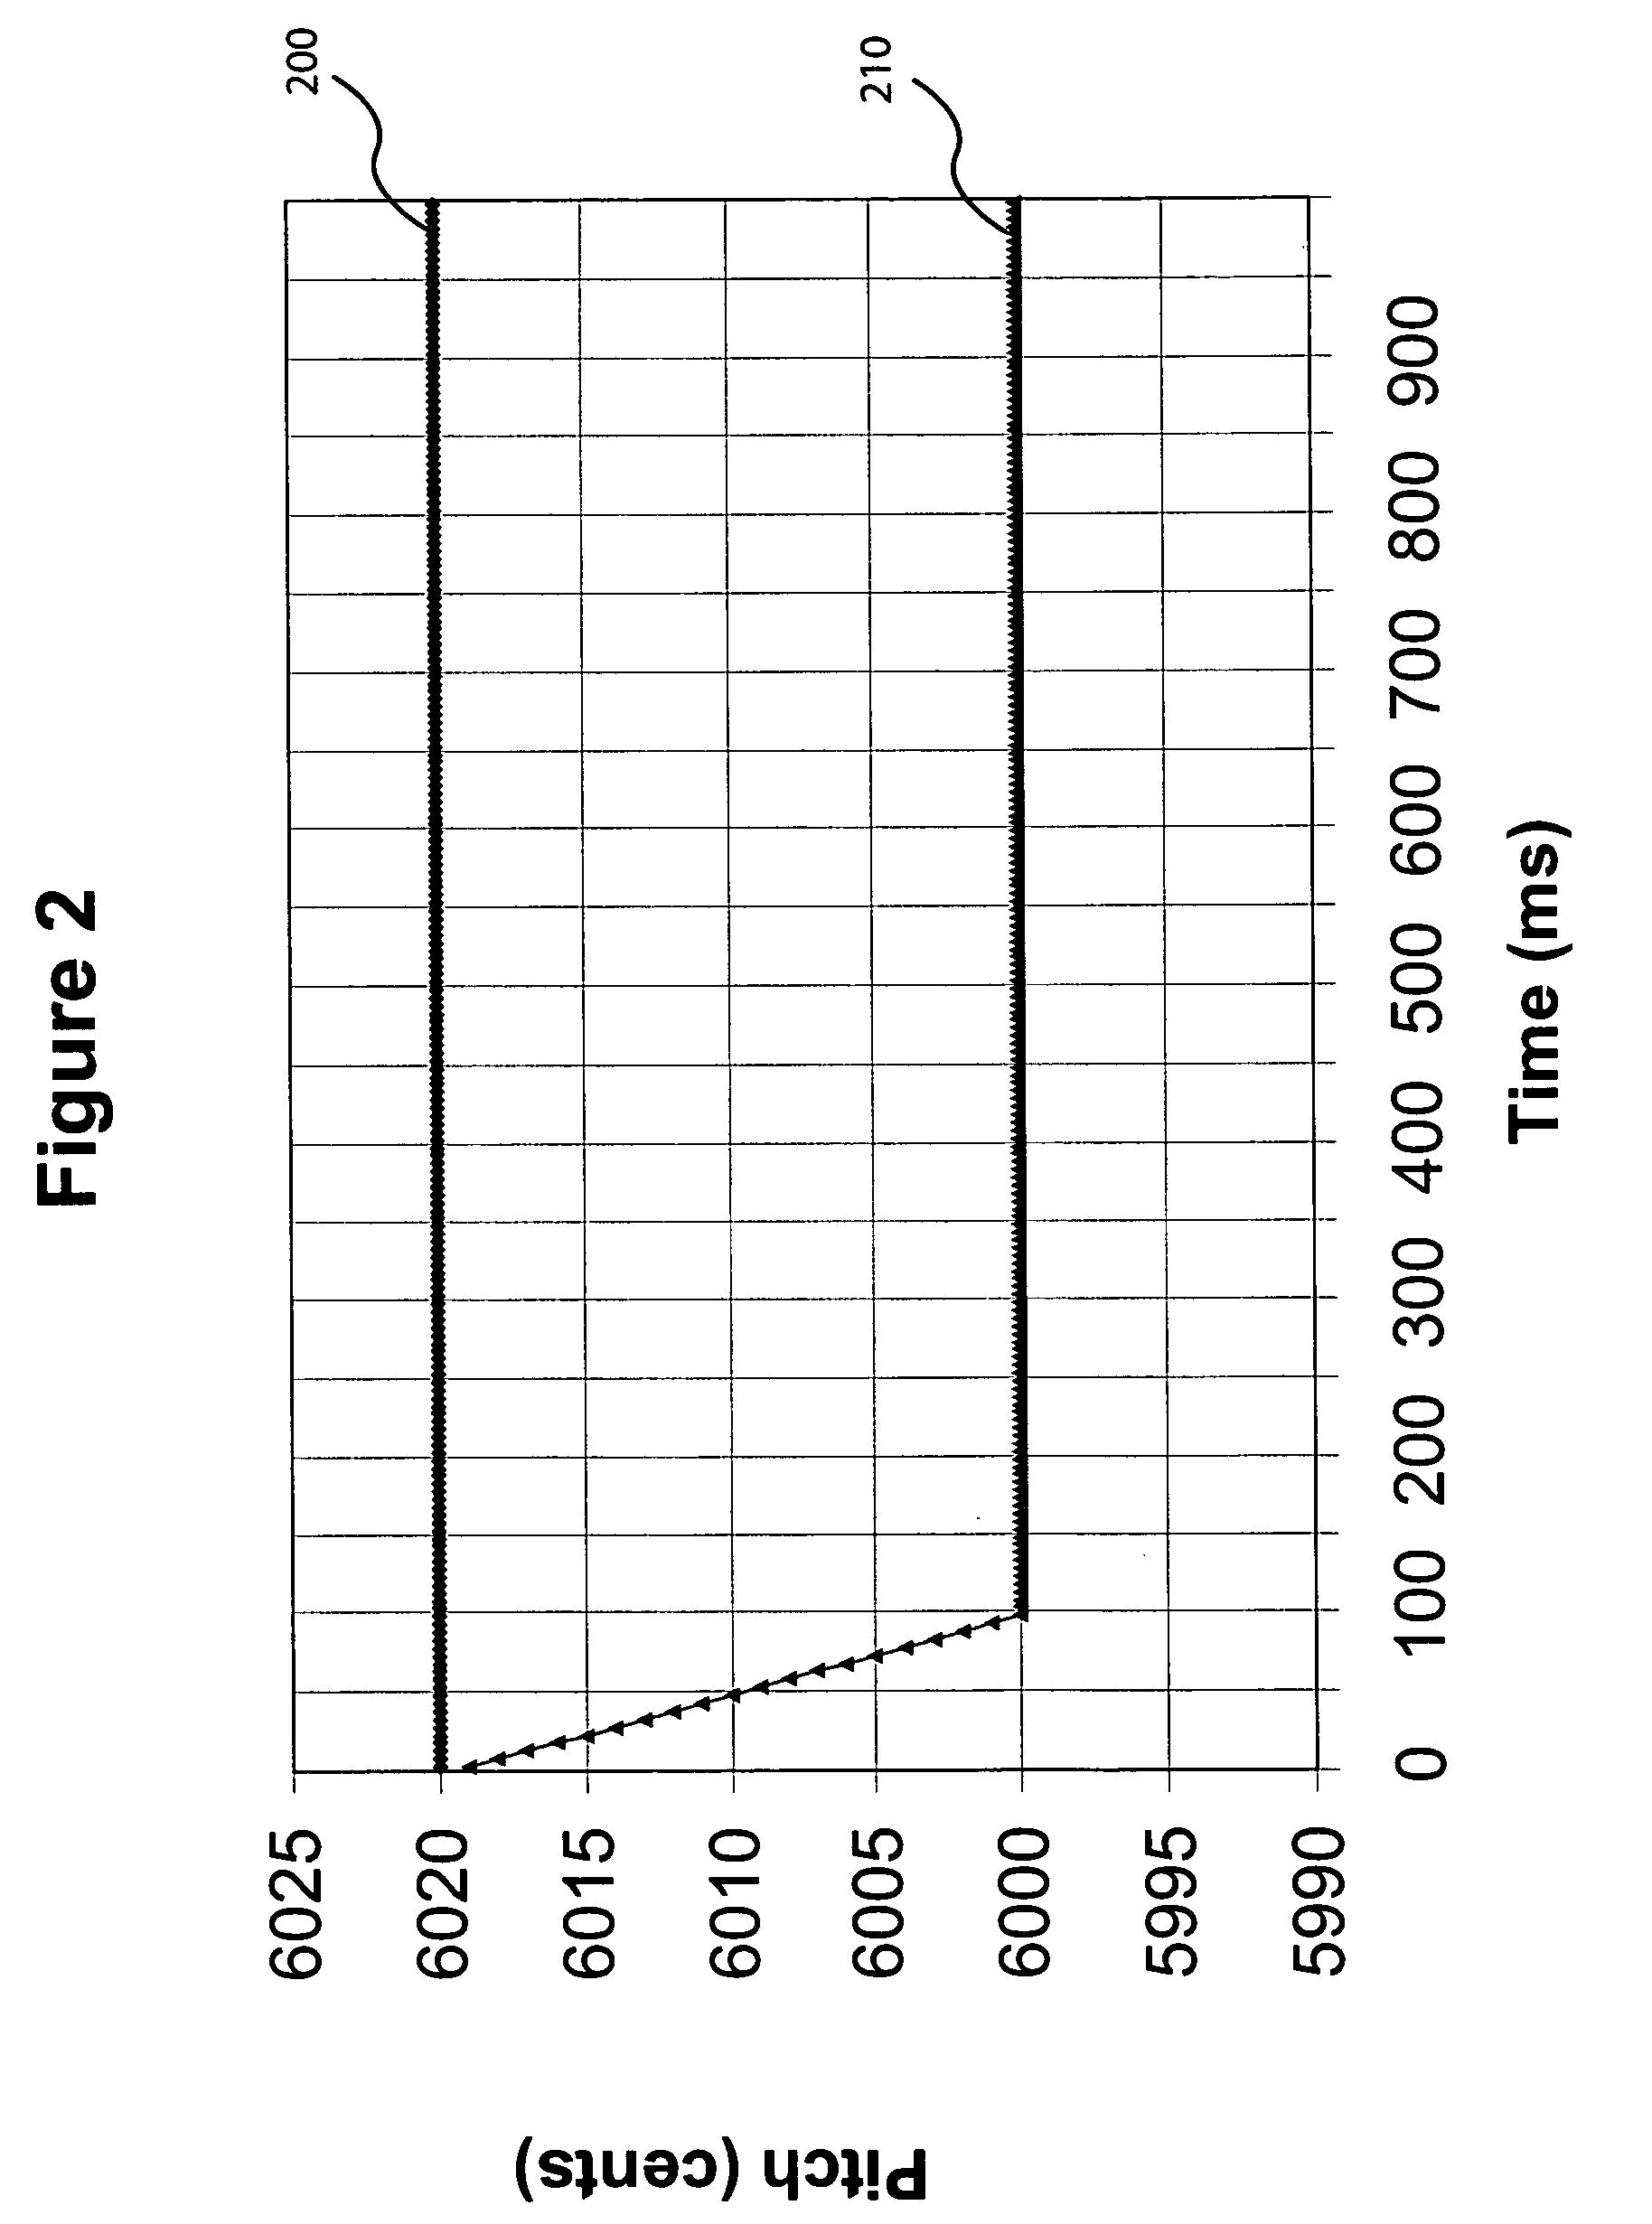 Position correction for an electronic musical instrument